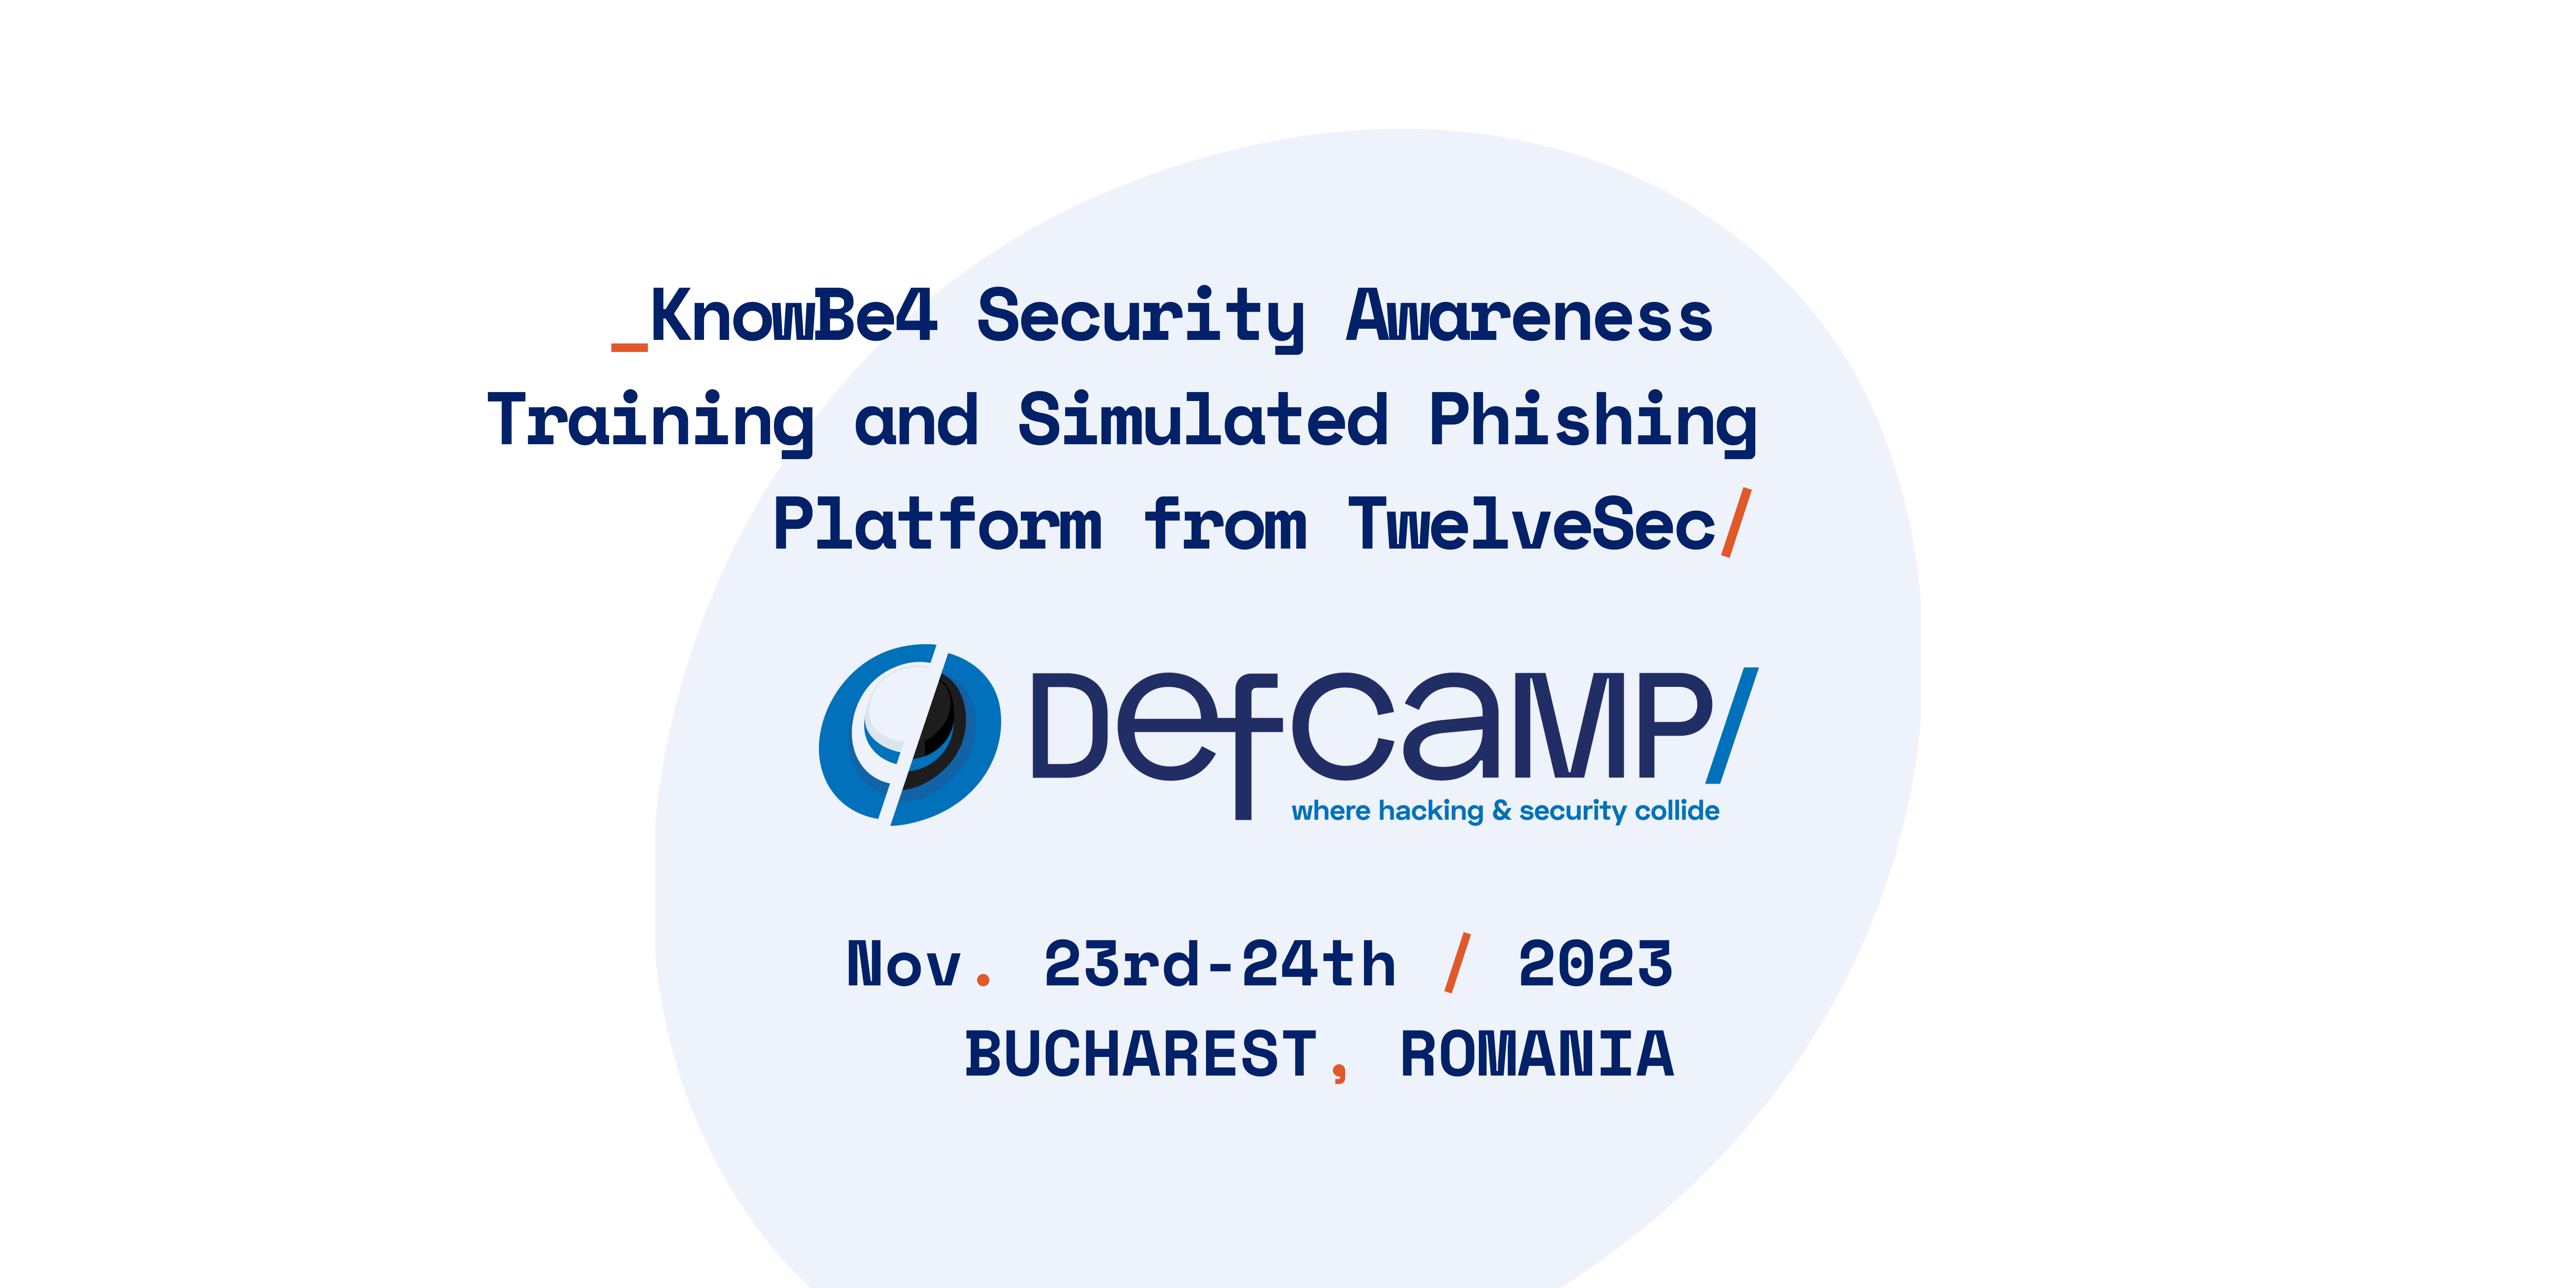 KnowBe4 Security Awareness Training and Simulated Phishing Platform from TwelveSec